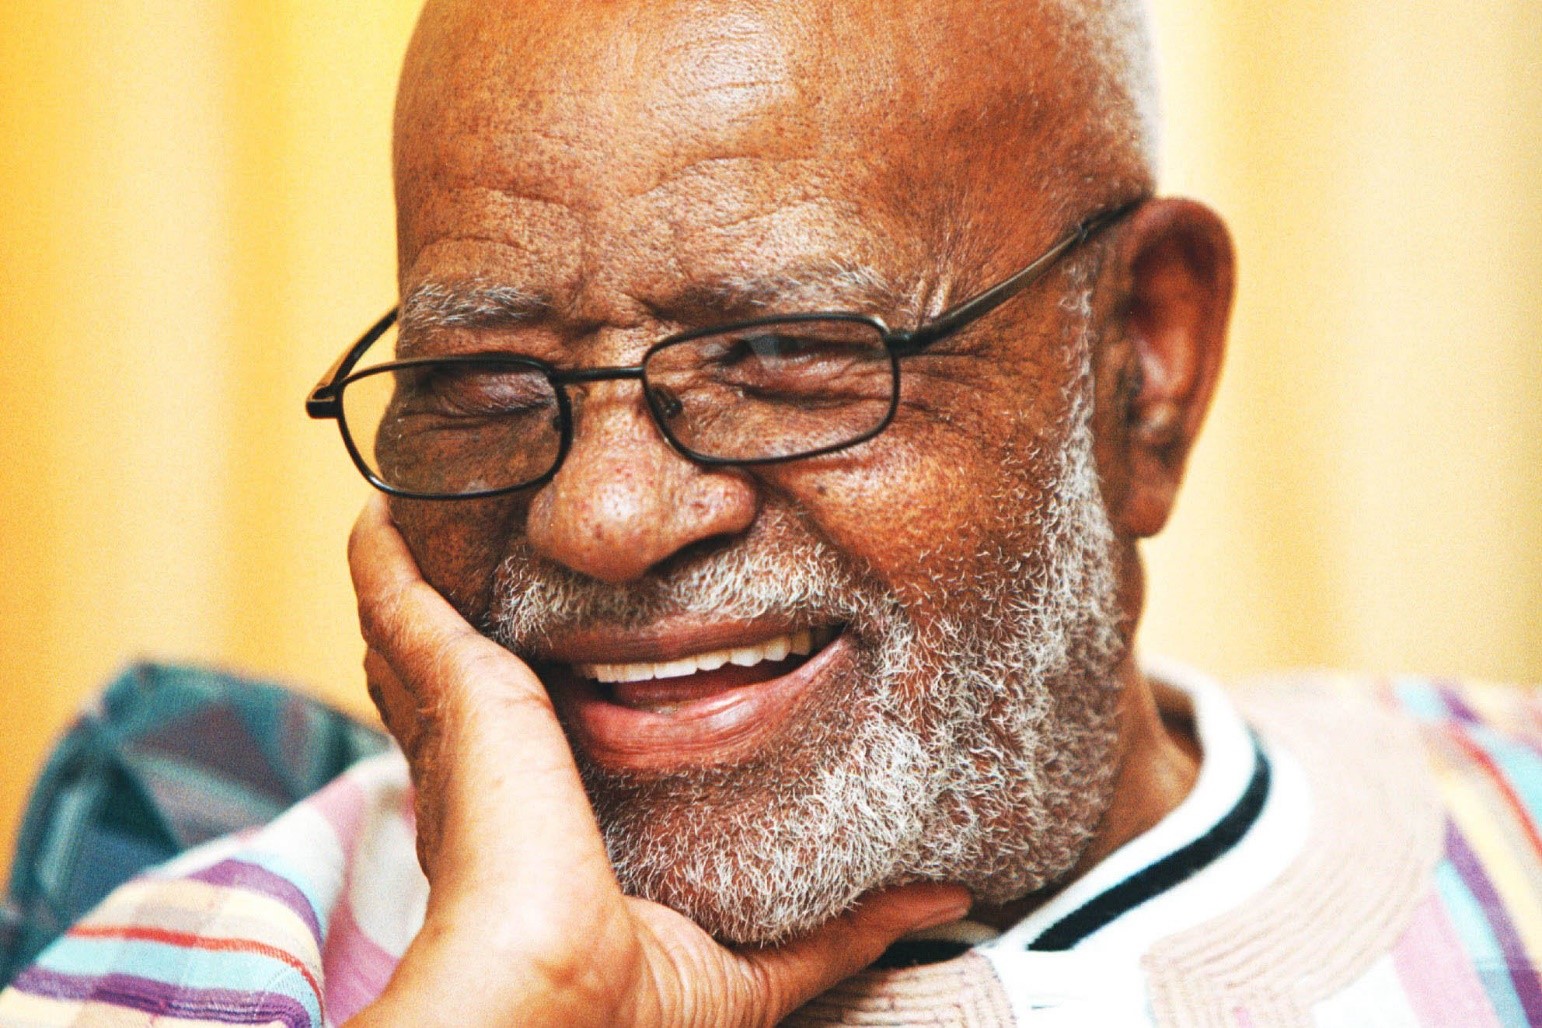 Es’kia Mphahlele and ‘Decolonising Education’ in South Africa